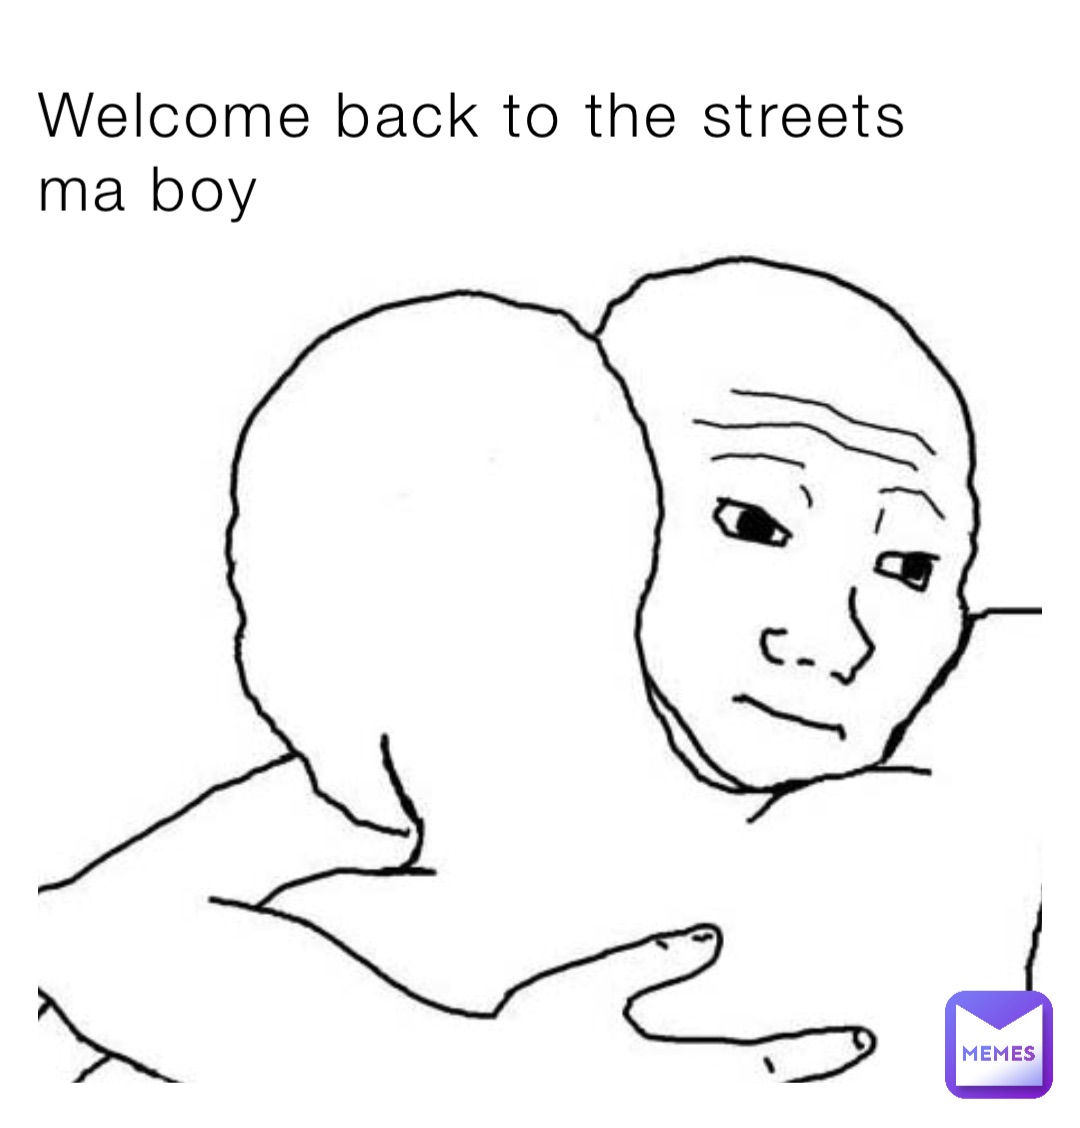 Welcome back to the streets ma boy